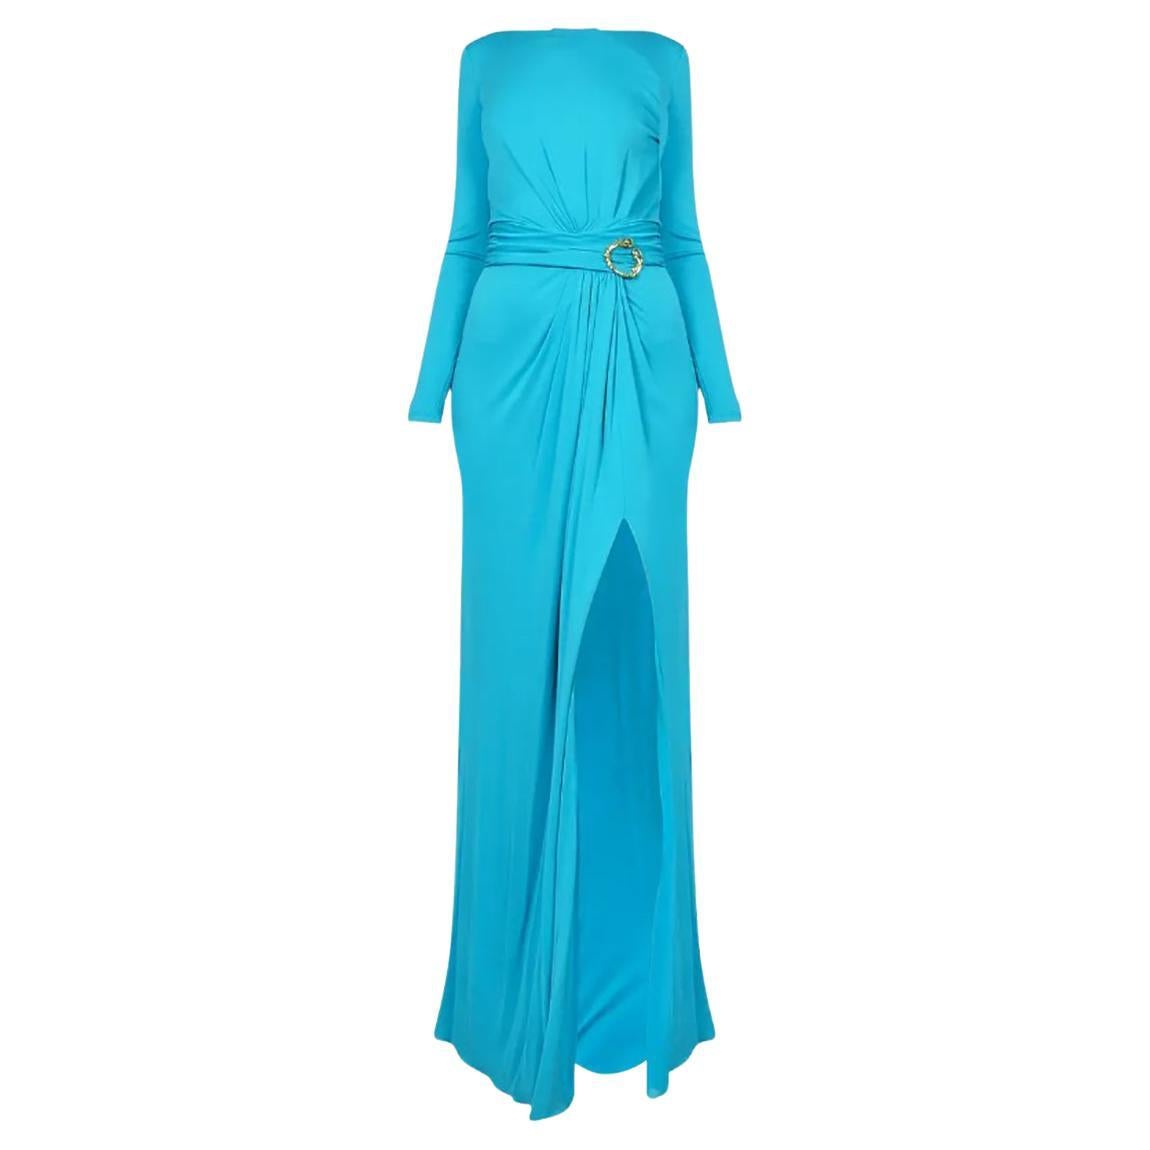 EMILIO PUCCI TEAL BLUE LONG DRESS with BROOCH It 40